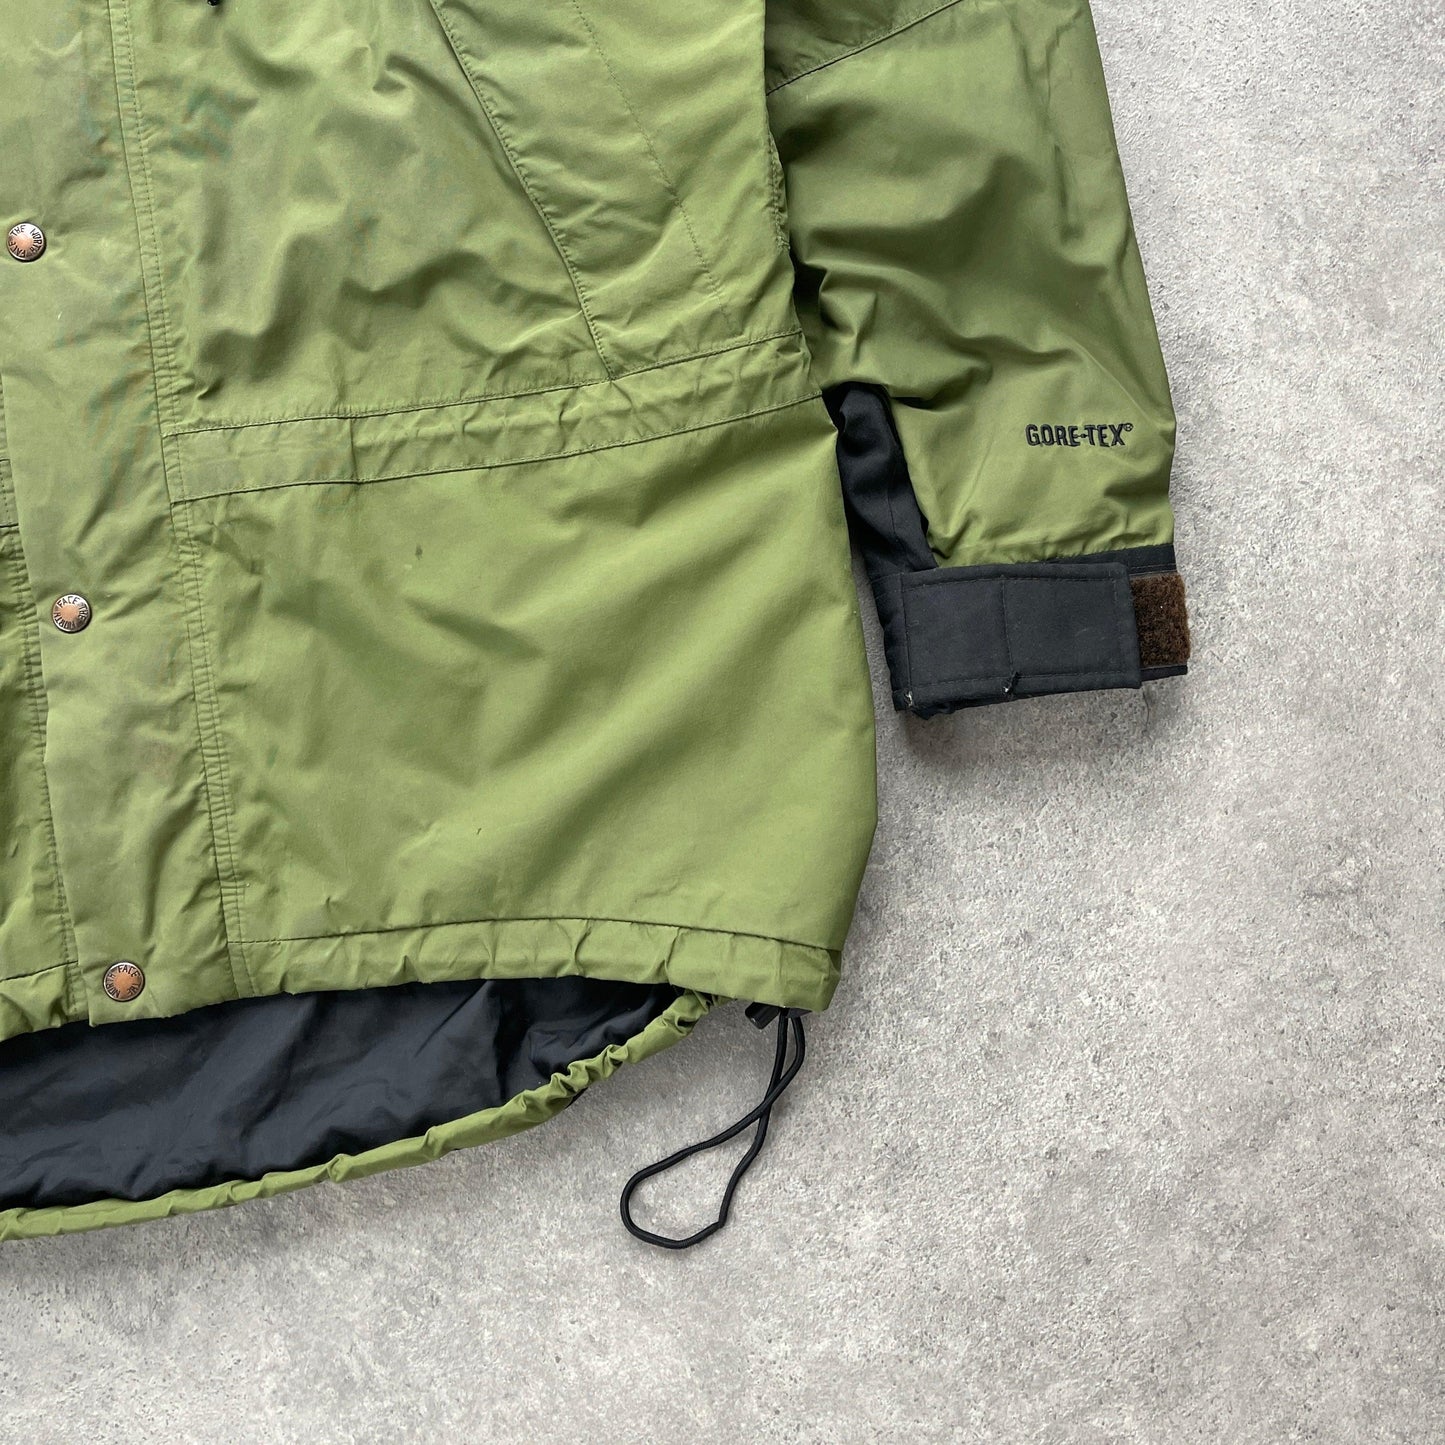 The North Face 1990s Gore-tex mountain jacket (M) - Known Source